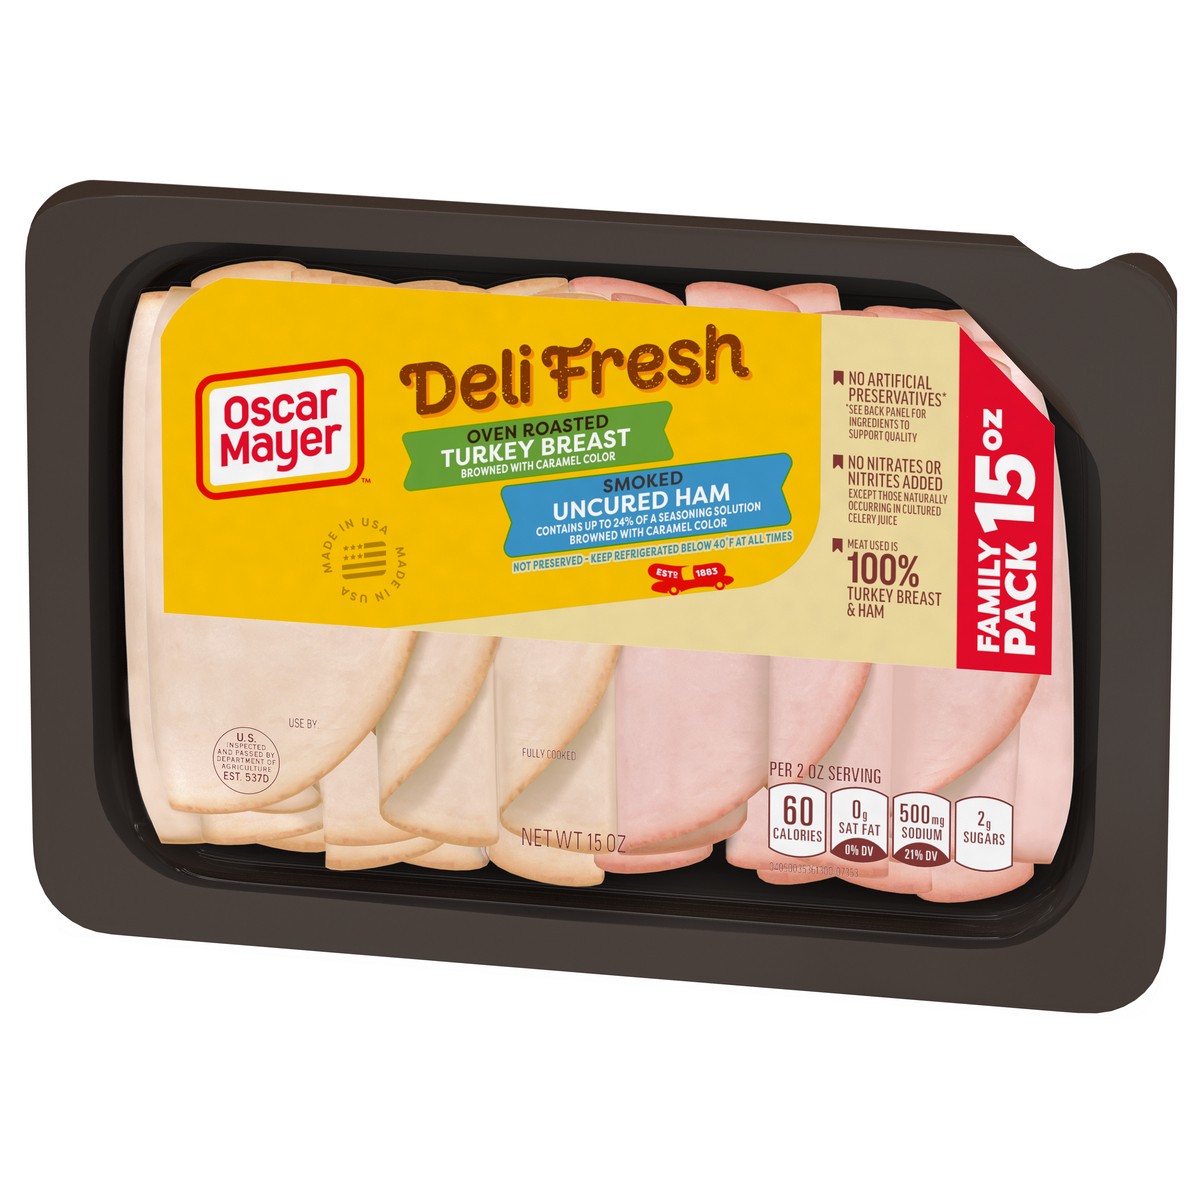 slide 4 of 9, Oscar Mayer Deli Fresh Oven Roasted Turkey Breast & Smoked Uncured Sliced Ham Deli Lunch Meats Variety Pack Family Size, 15 oz. Tray, 15 oz